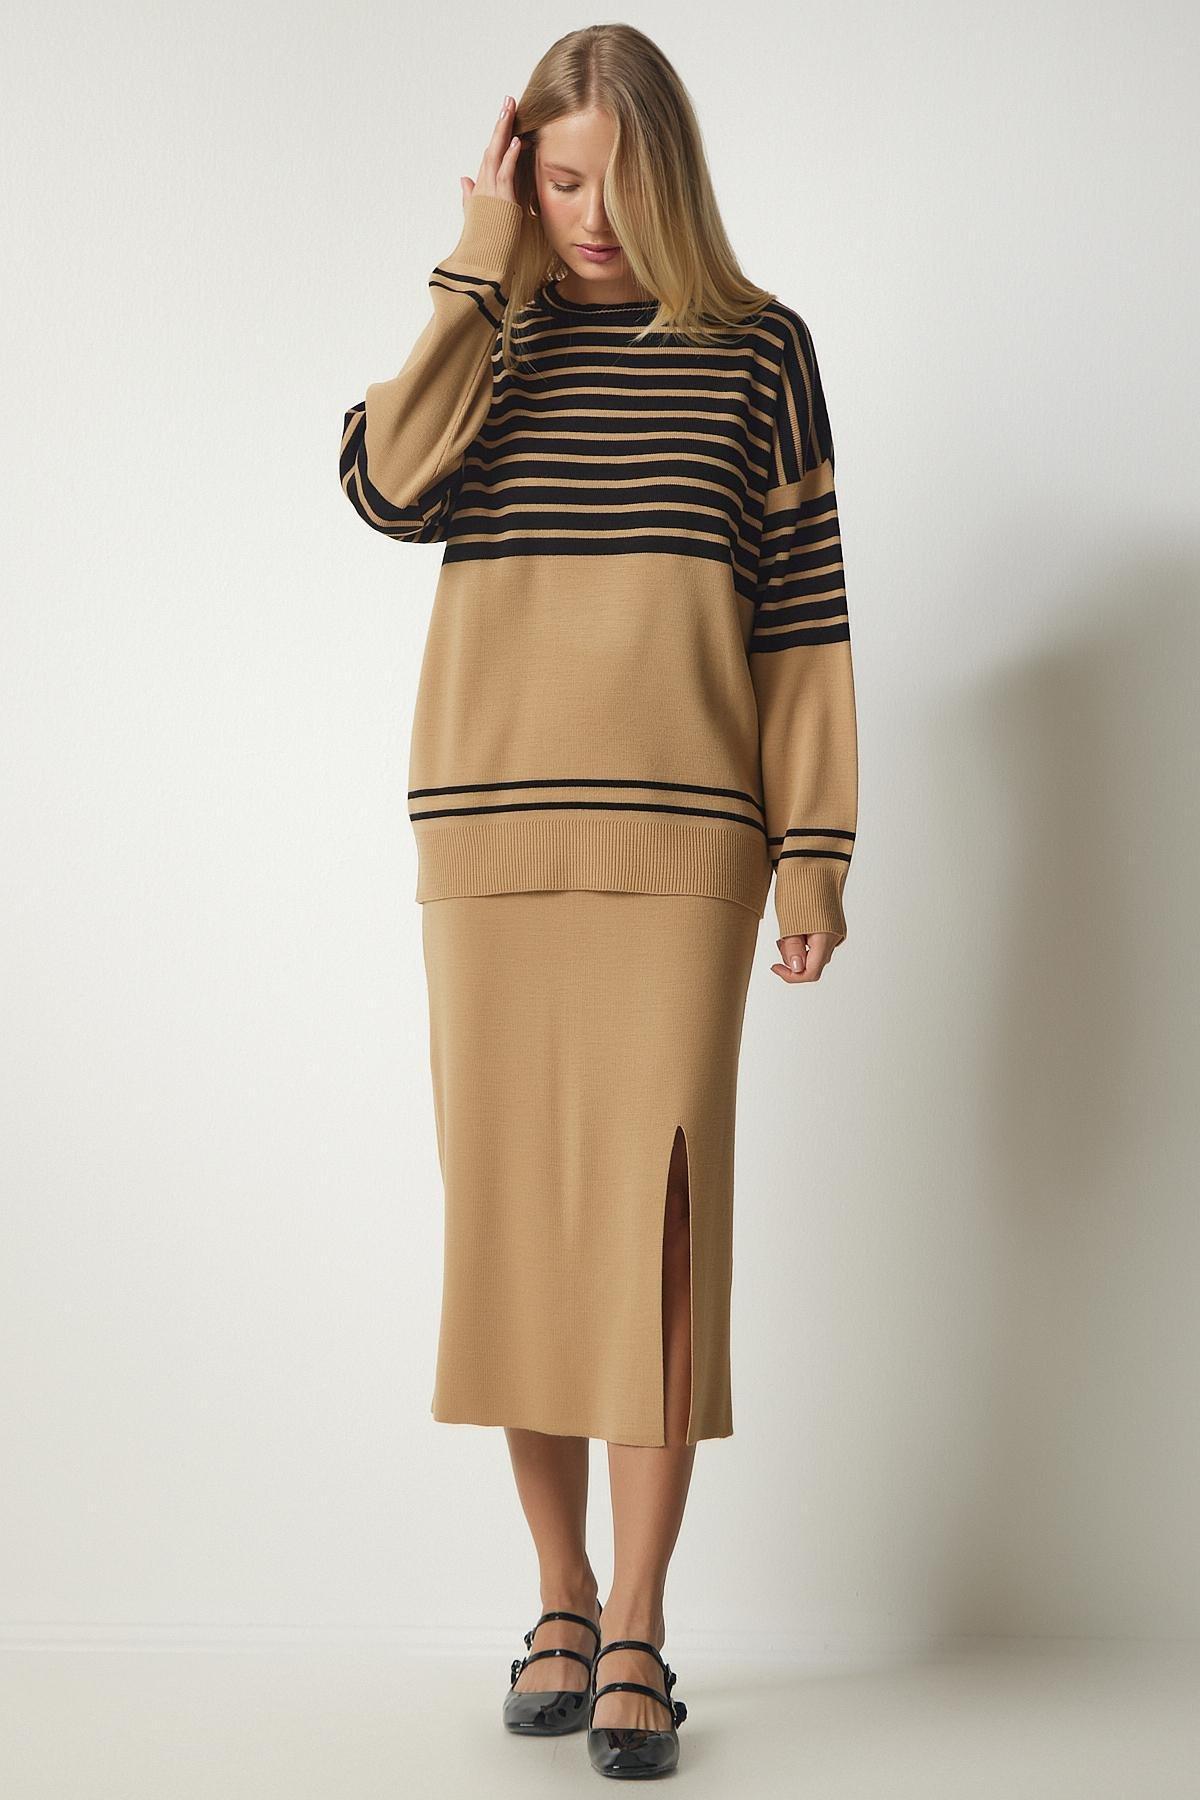 Happiness Istanbul - Beige Striped Sweater Skirt Knitwear Co-Ord Set